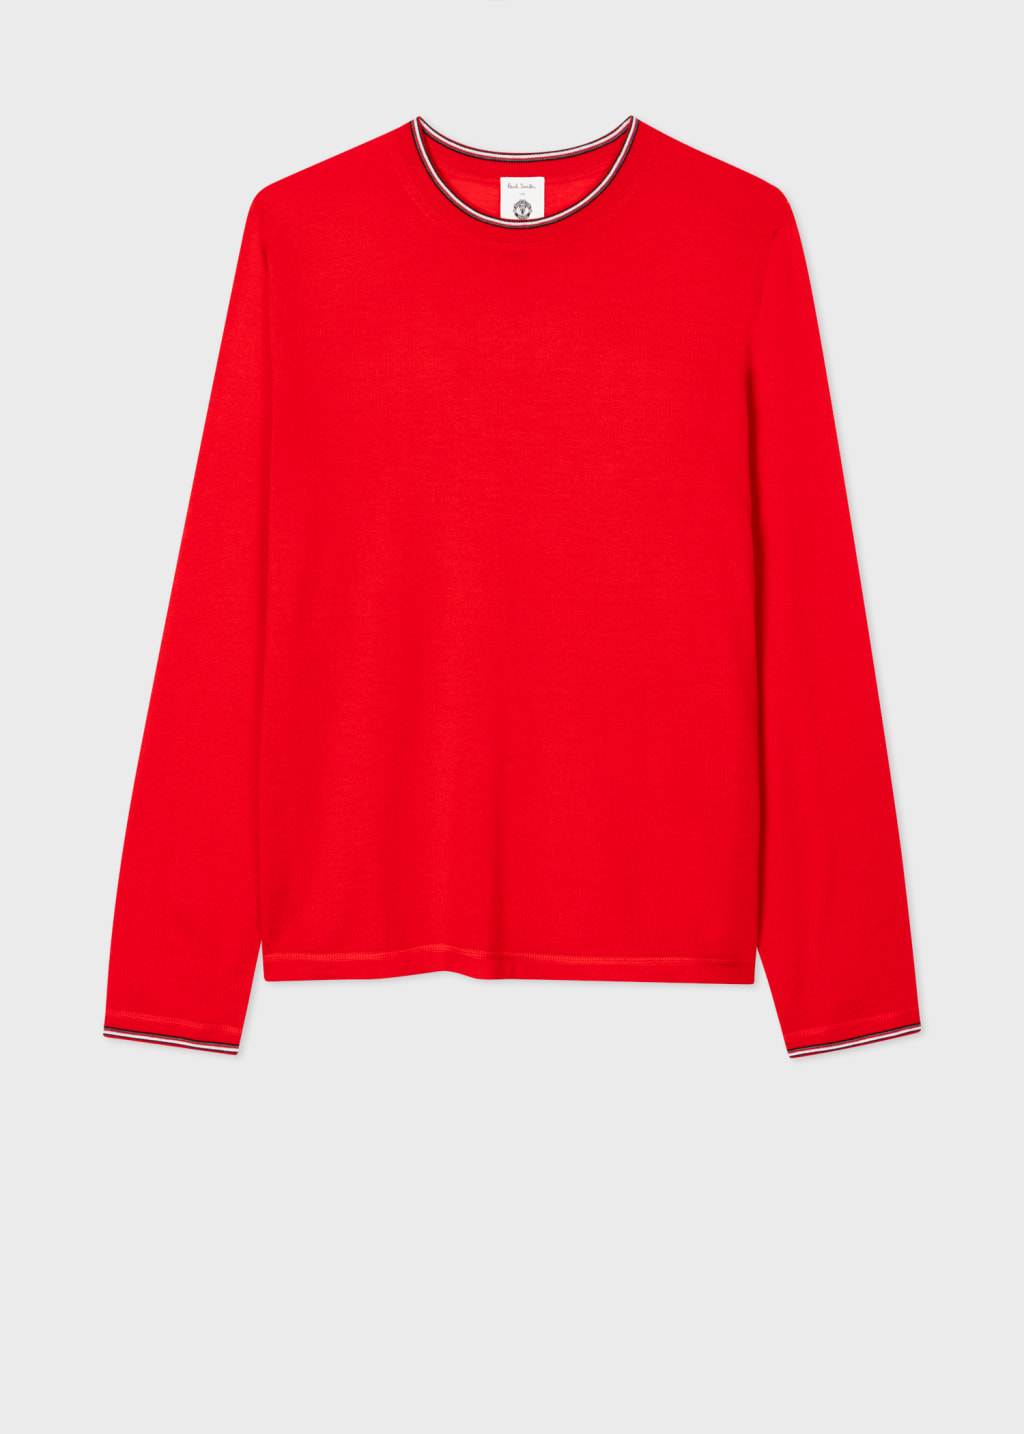 Front View - Paul Smith & Manchester United - Red Merino Sweater Paul Smith